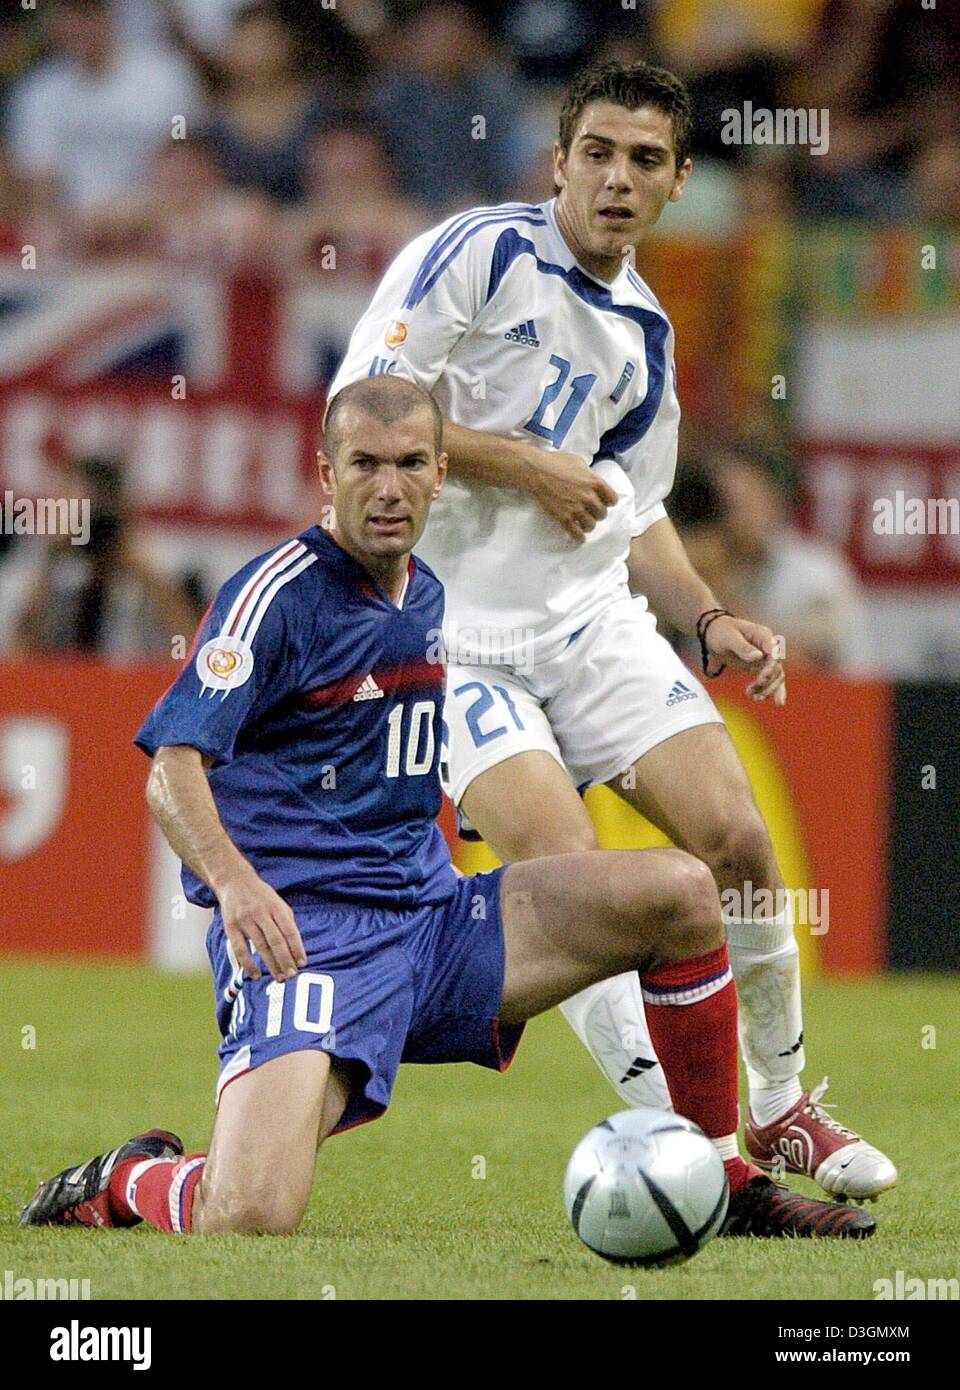 (dpa) - French midfielder and team captain Zinedine Zidane (front) is attacked by his Greek counterpart Konstantinos Katsouranis during the Soccer Euro 2004 quarter final opposing France and Greece in Lisbon, Portugal, 25 June 2004. With a sensational 1-0 victory Greece eliminates title defender France. +++NO MOBILE PHONE APPLICATIONS +++ Stock Photo